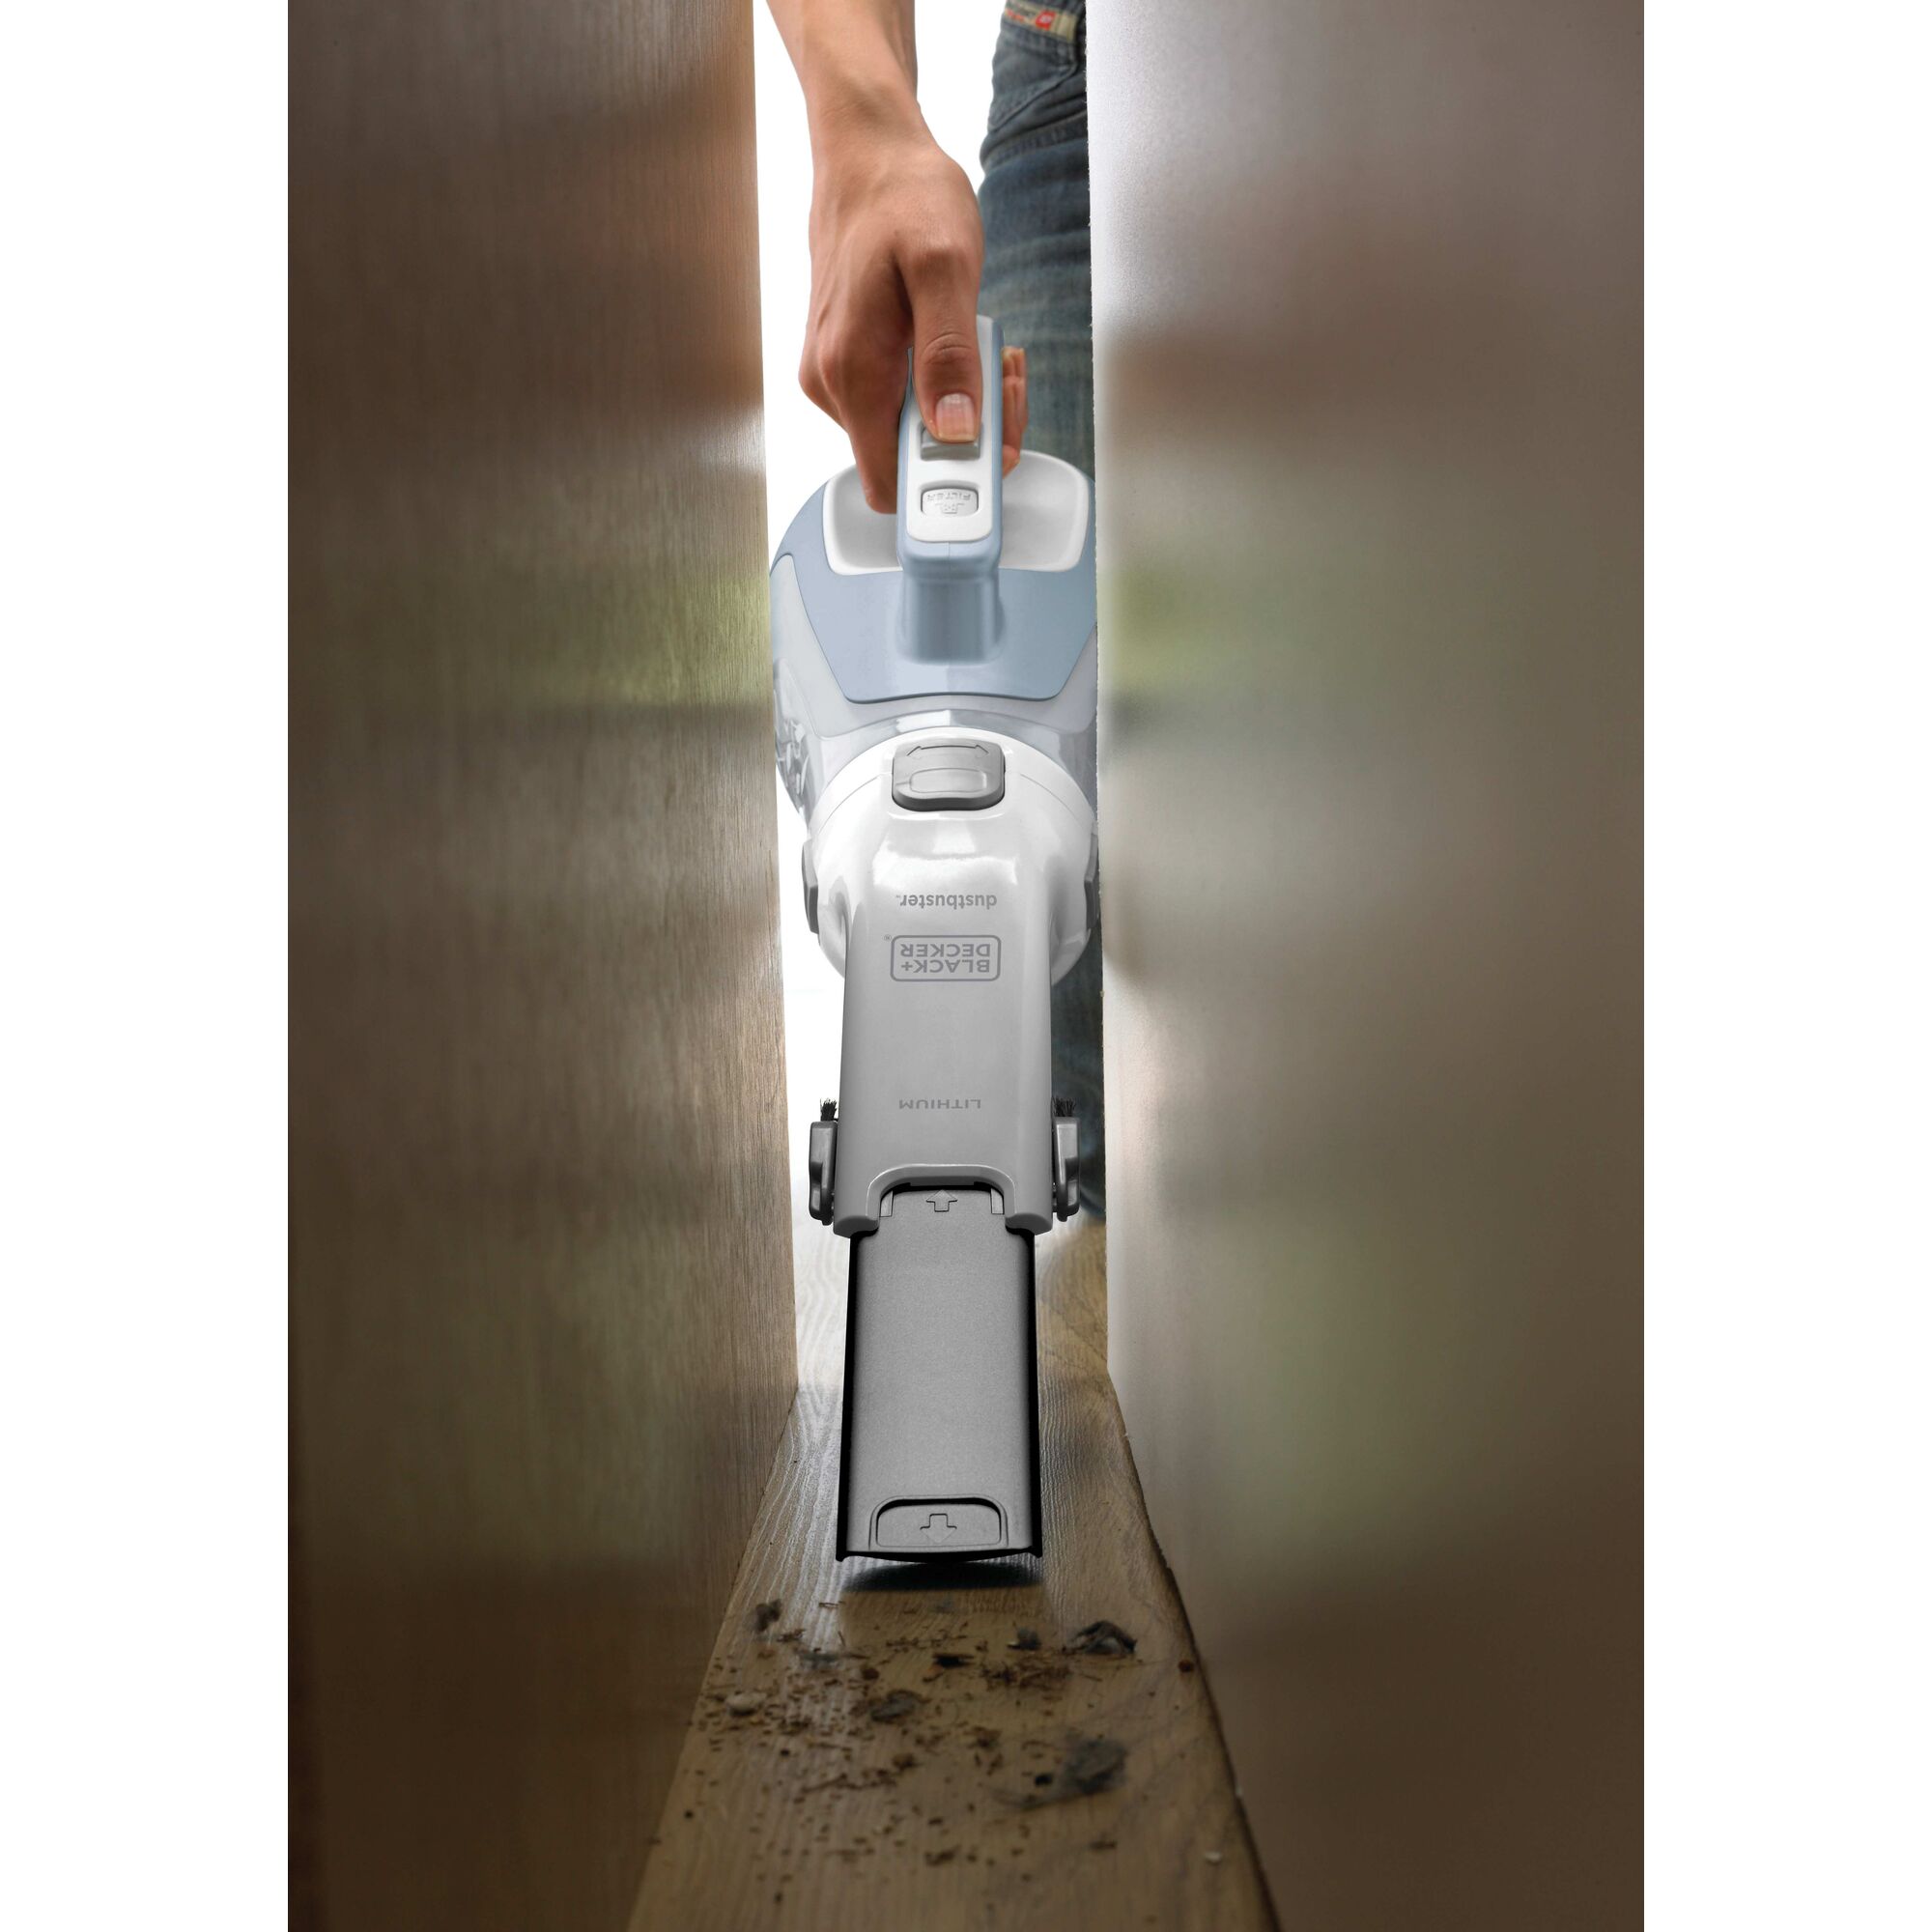 dustbuster Cordless Hand Vacuum being used to clean in difficult to reach place.